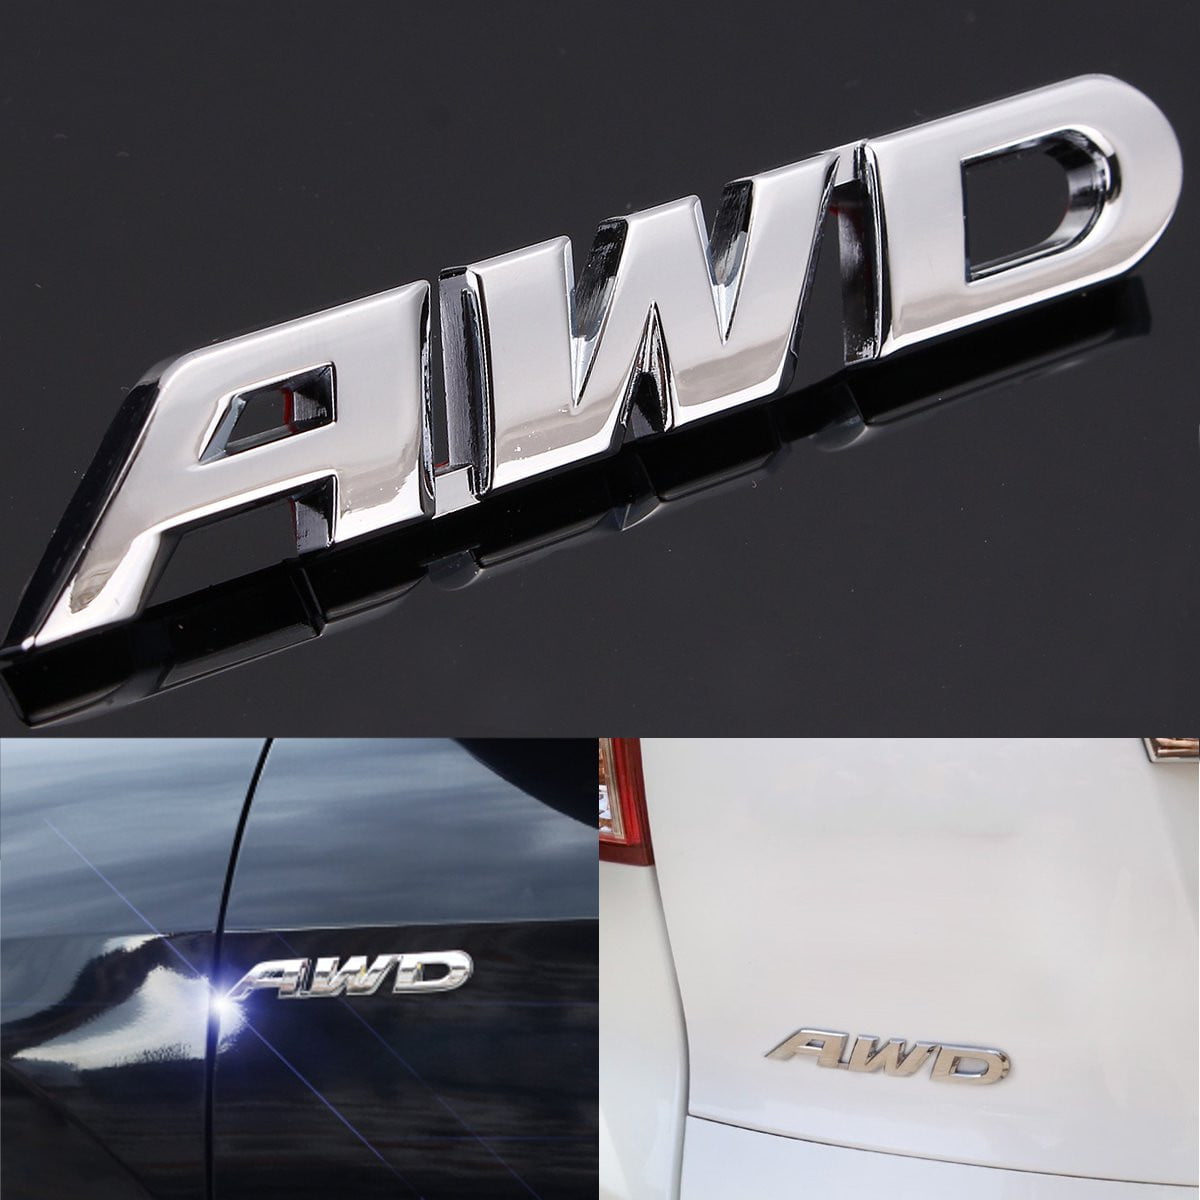 Silver Car AWD Metal Emblem Badge Decal Sticker for 4 Wheel Drive SUV Tailgate